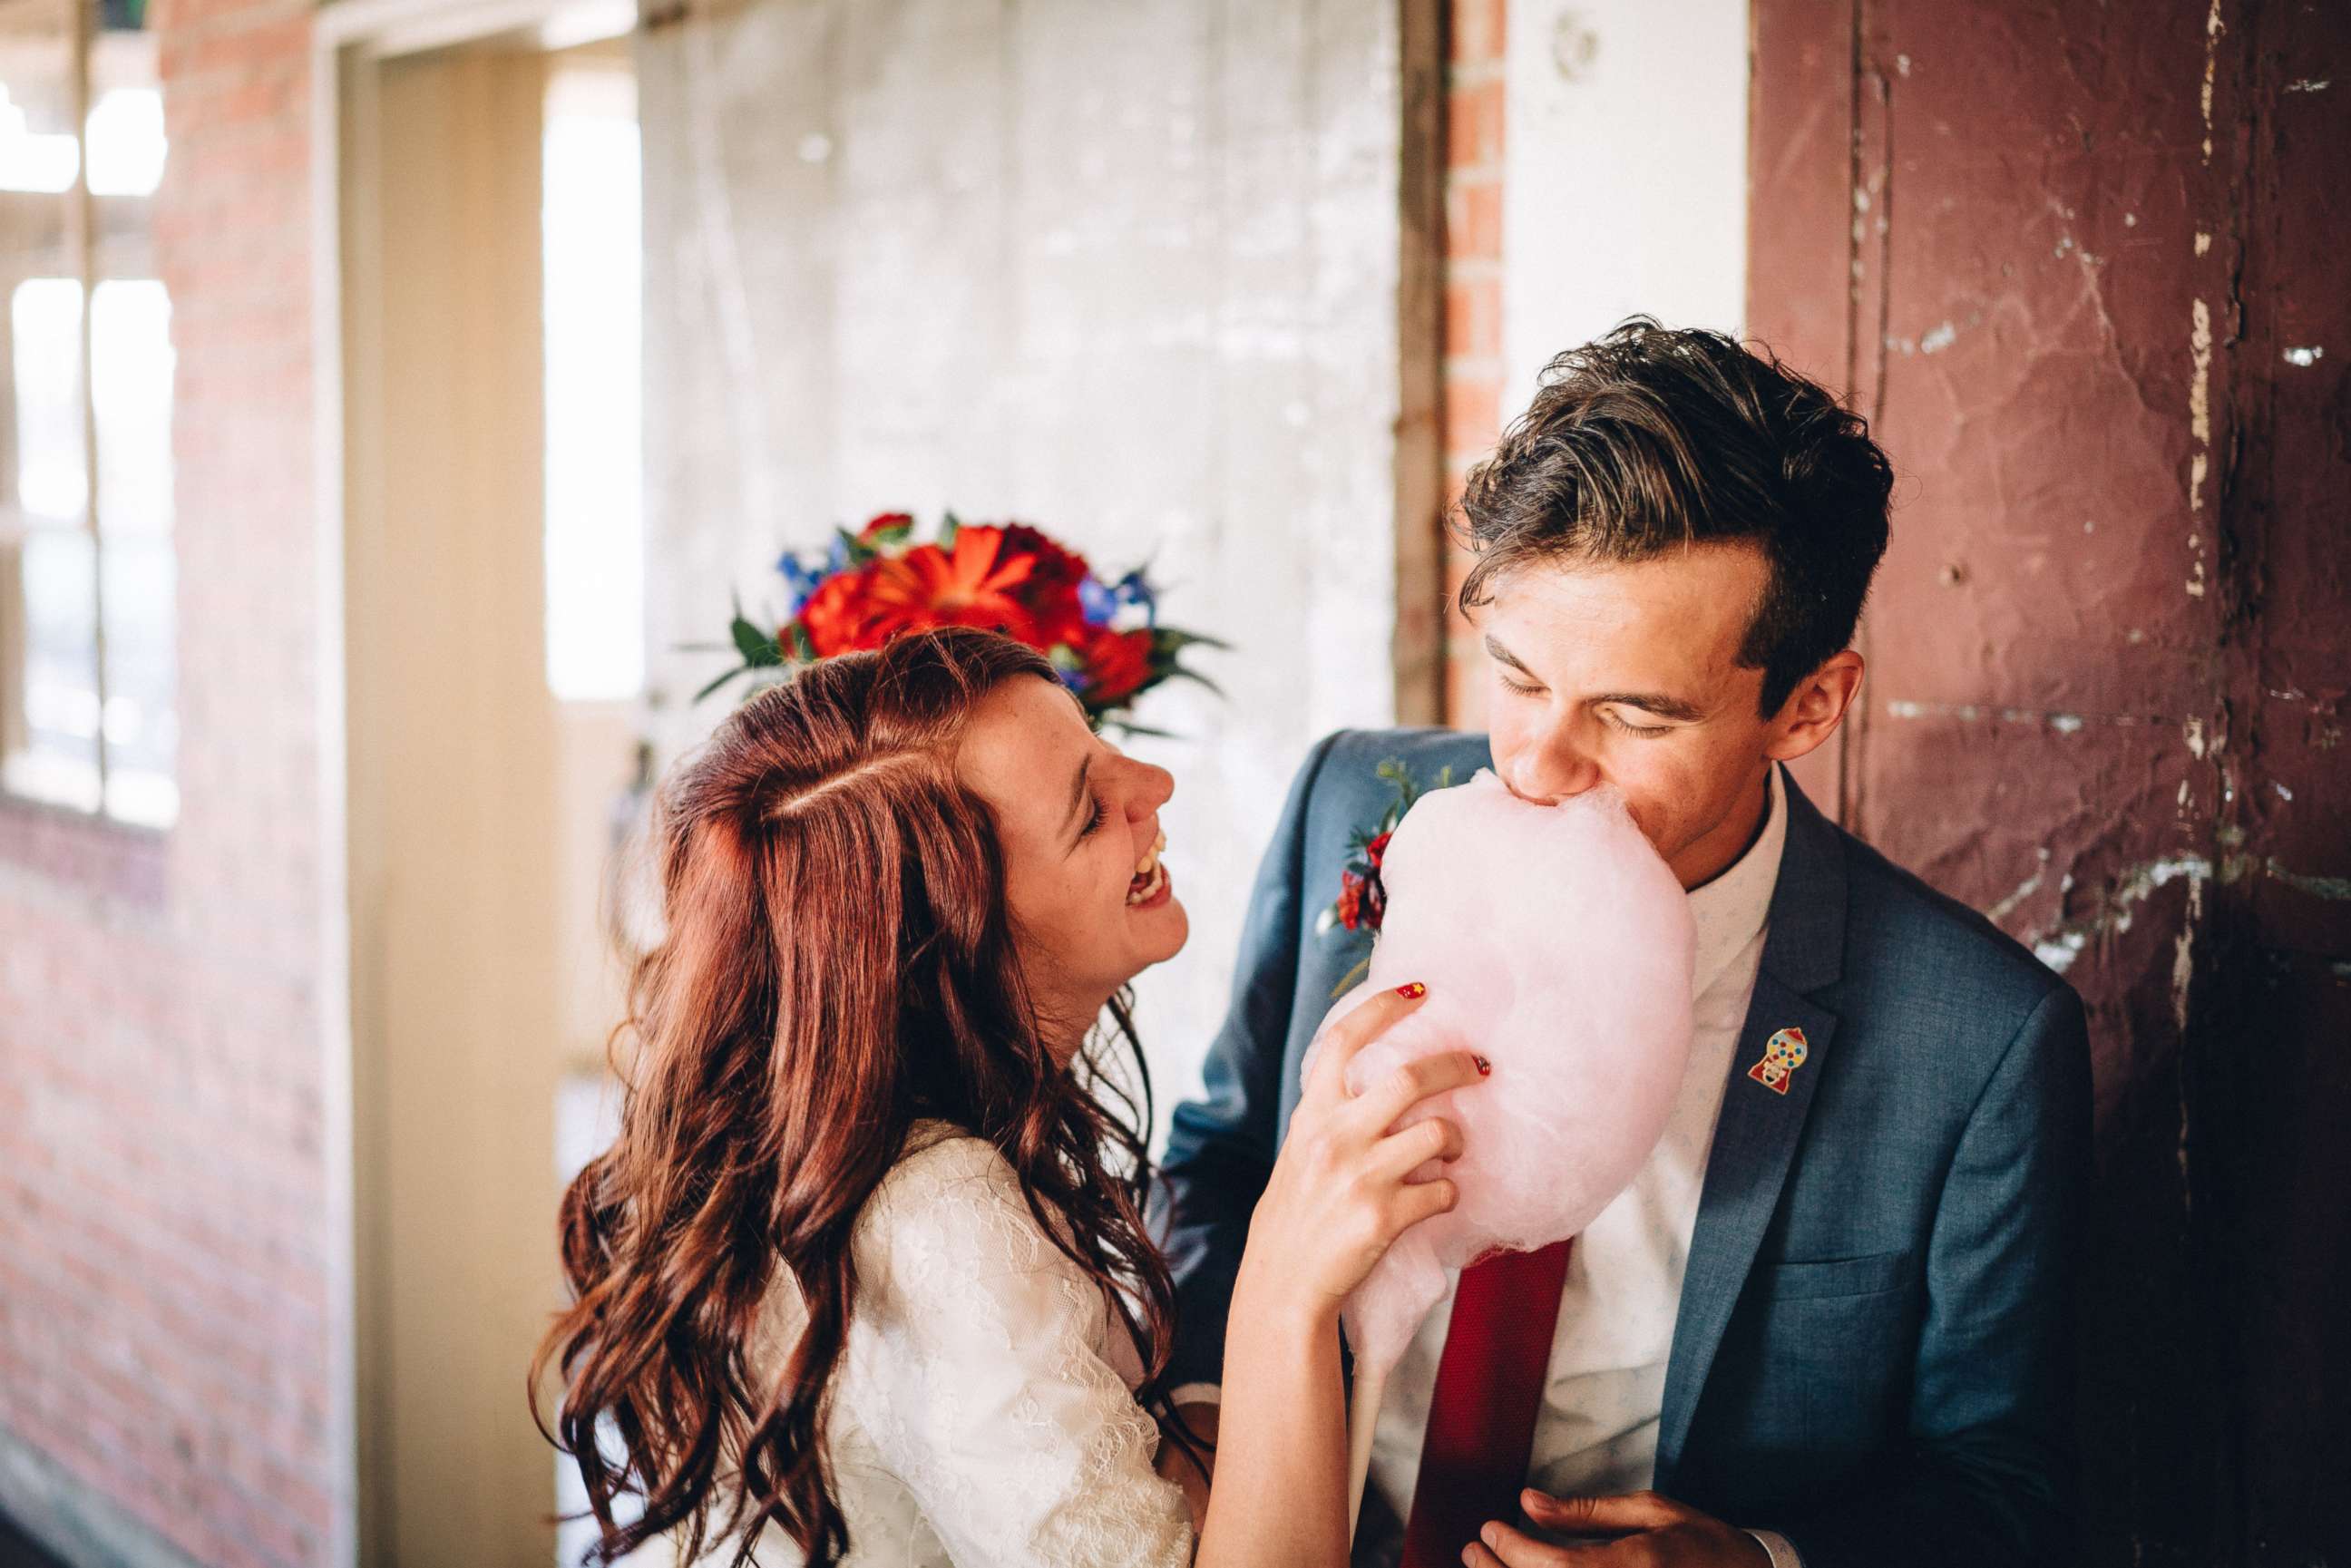 PHOTO: Sara Goodwin and her husband are pictured on their wedding day in Salt lake City. They had cotton candy as a treat at the reception.